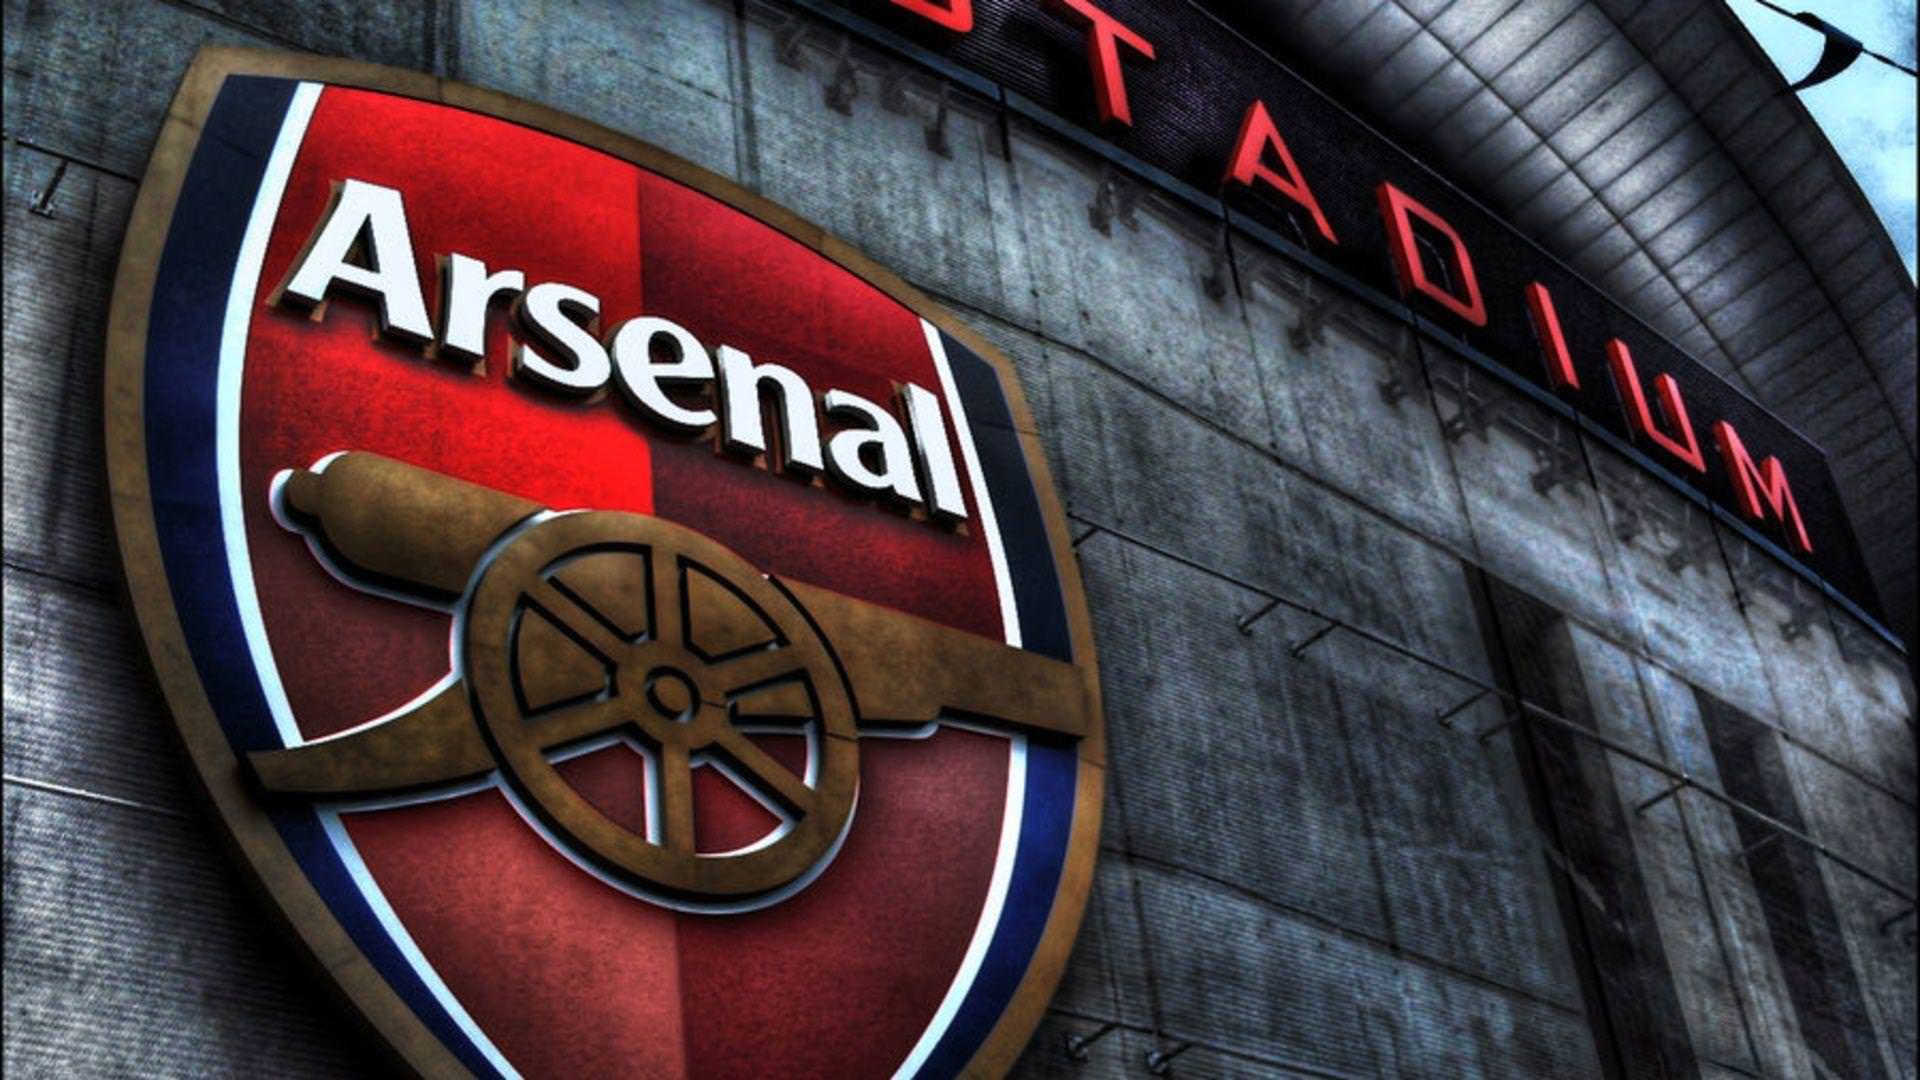 Arsenal FC Wallpaper for iPhone 12 Pro